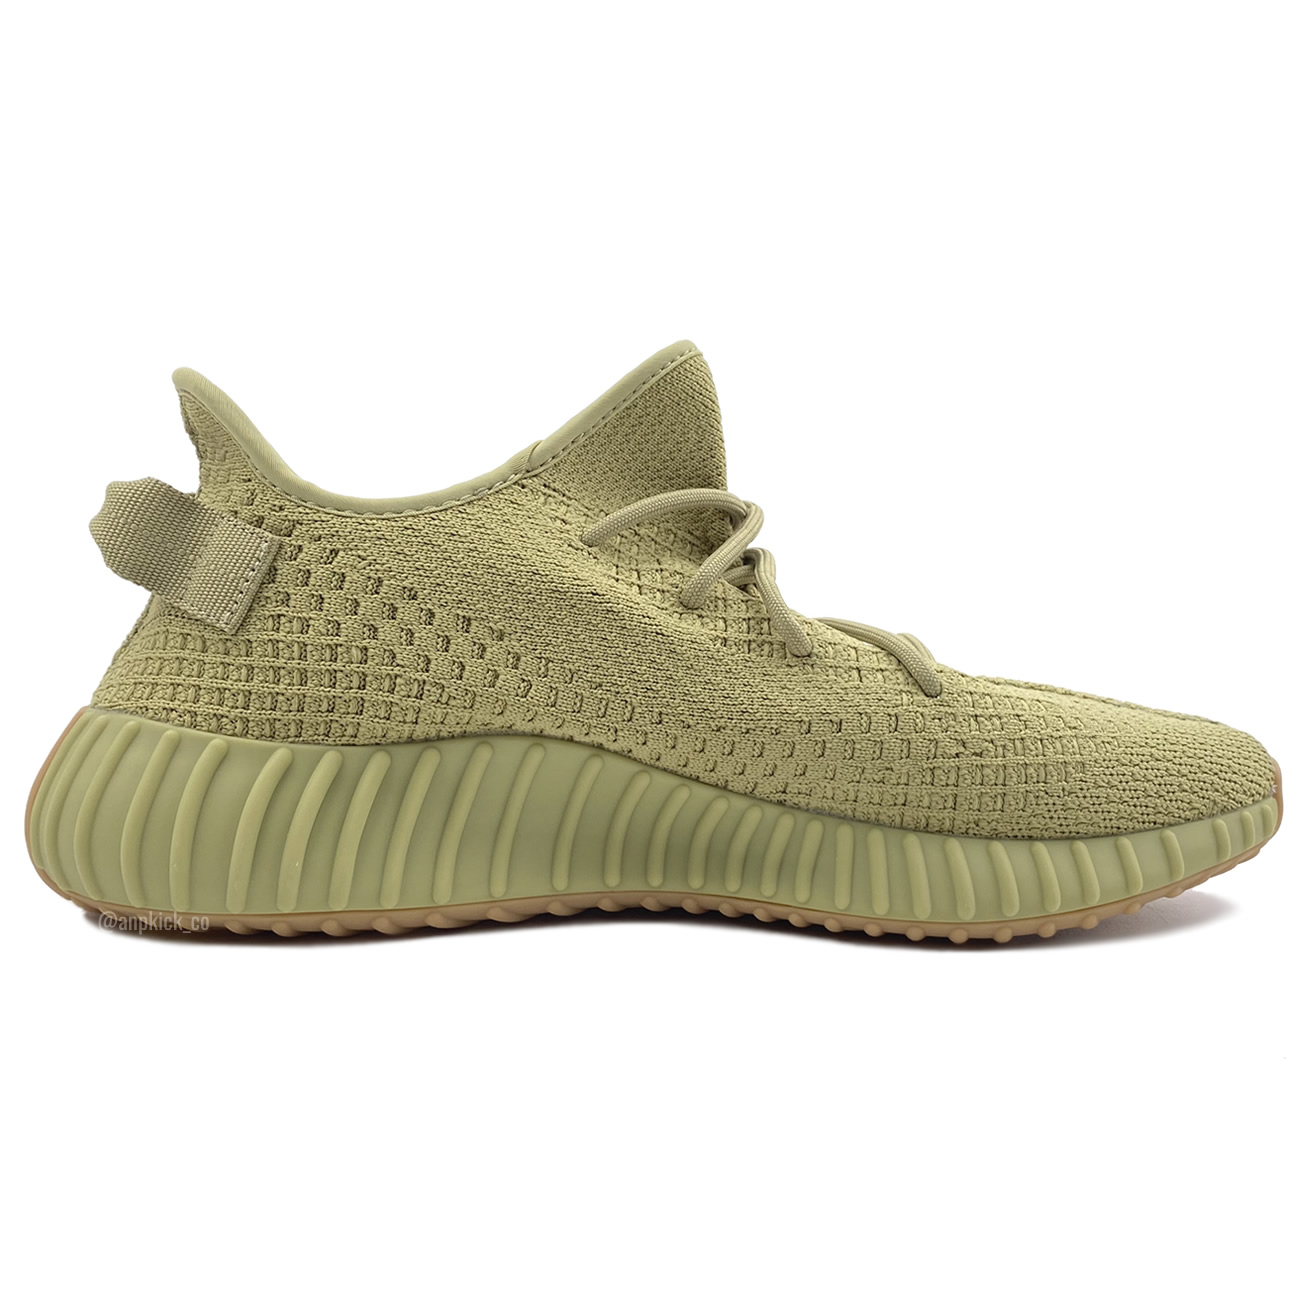 Adidas Yeezy Boost 350 V2 Sulfur Fy5346 First Preview Release Date (2) - www.newkick.org